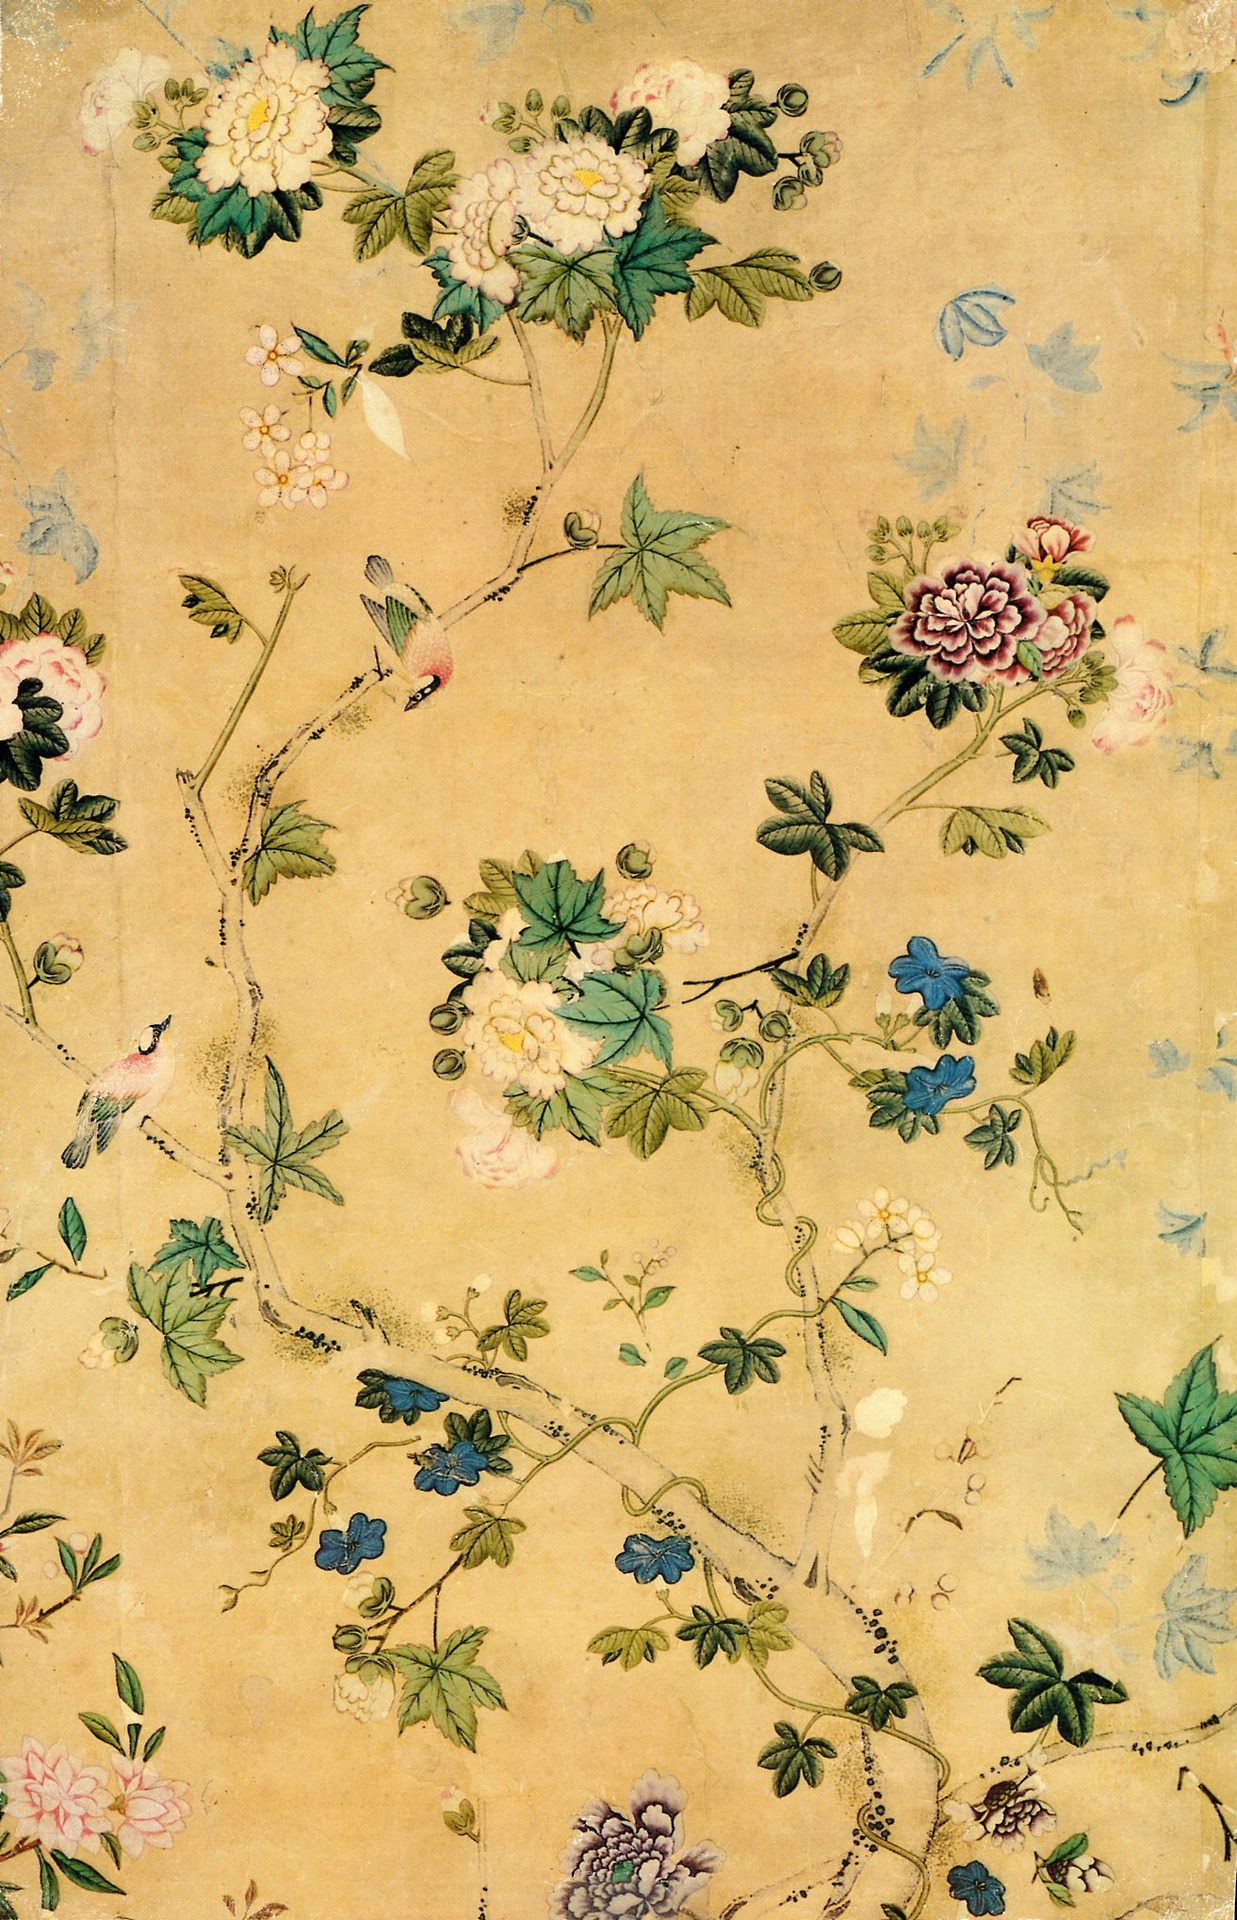 18th Century Hand Painted Chinese Wallpaper Century Wallpaper Patterns